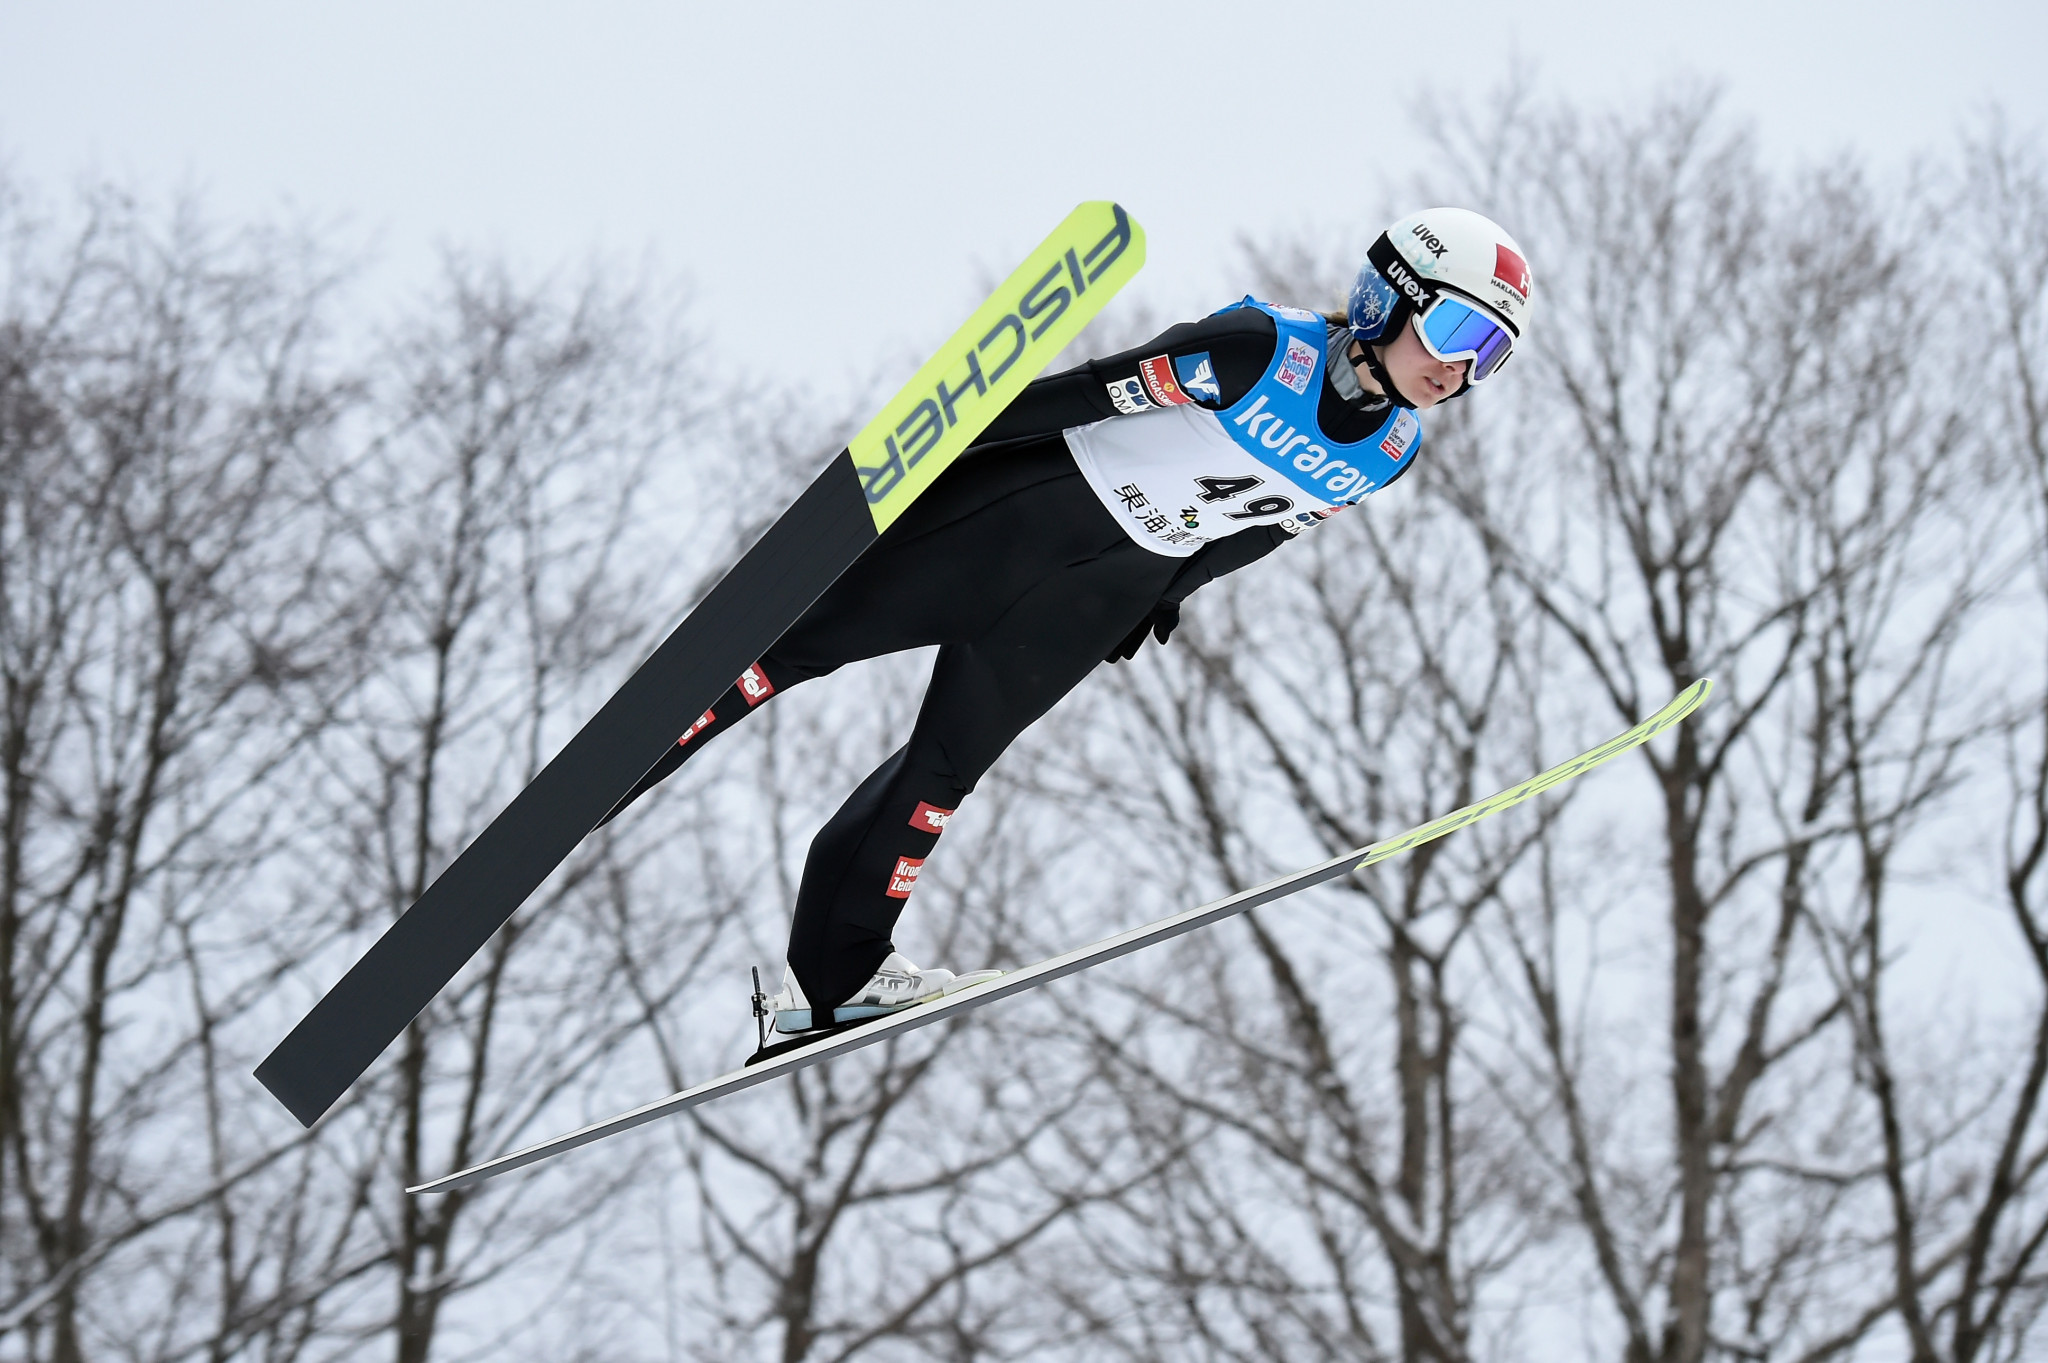 Hoelzl takes FIS Ski Jumping World Cup lead with victory in Rasnov